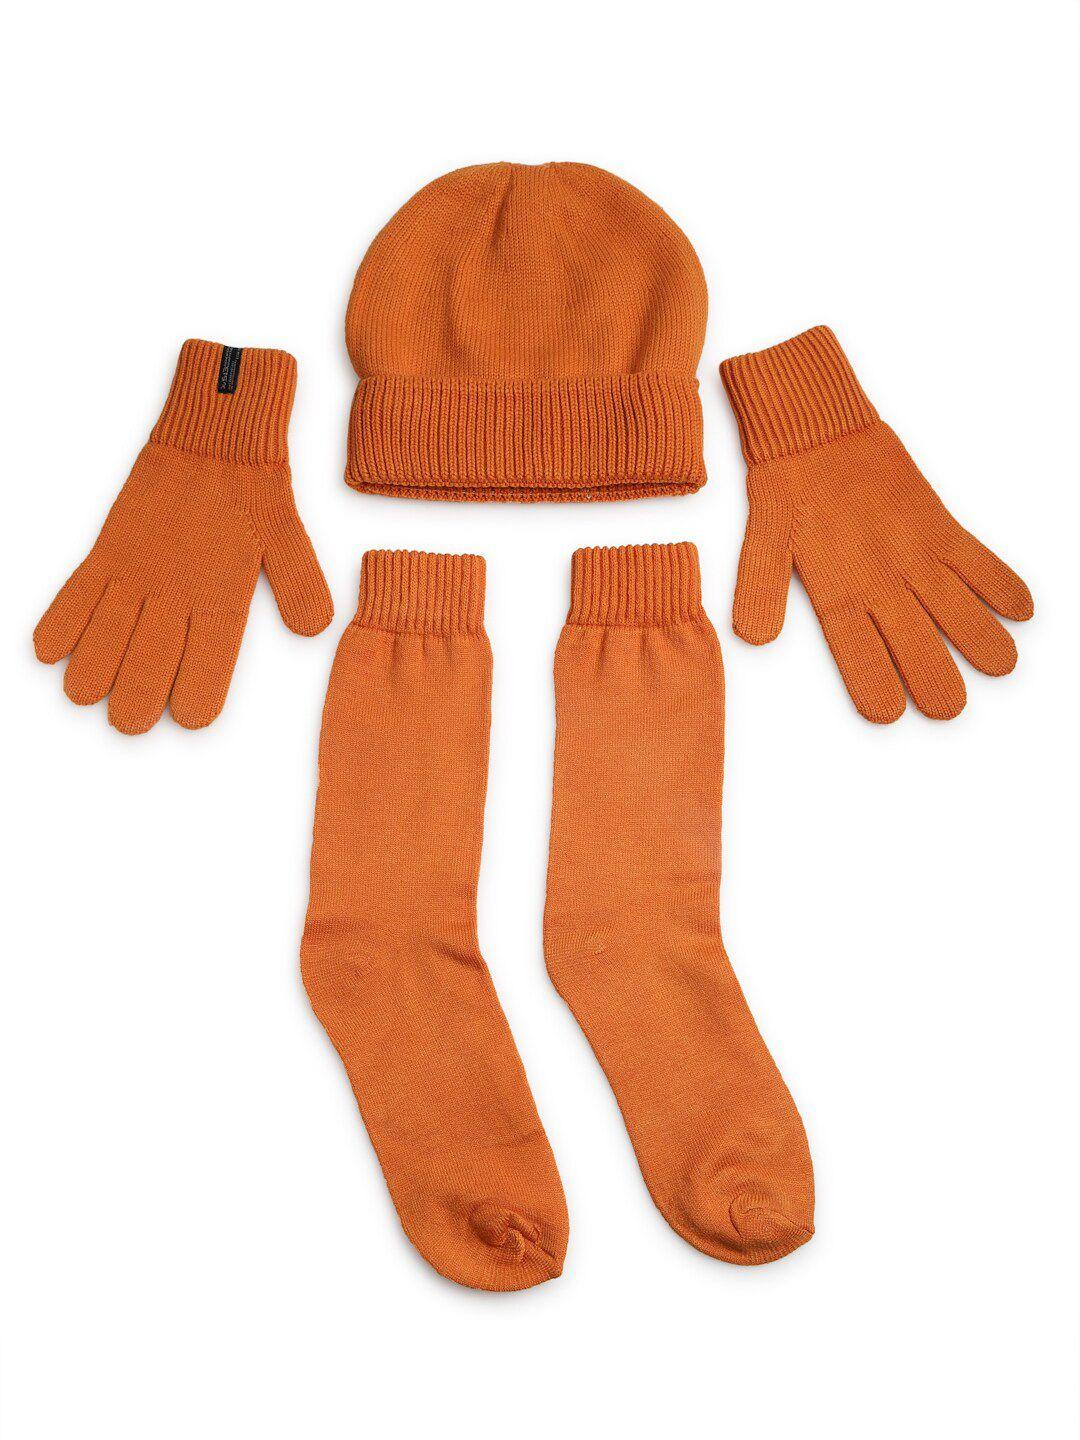 513 kids pack of 3 knitted acrylic cap with gloves & socks